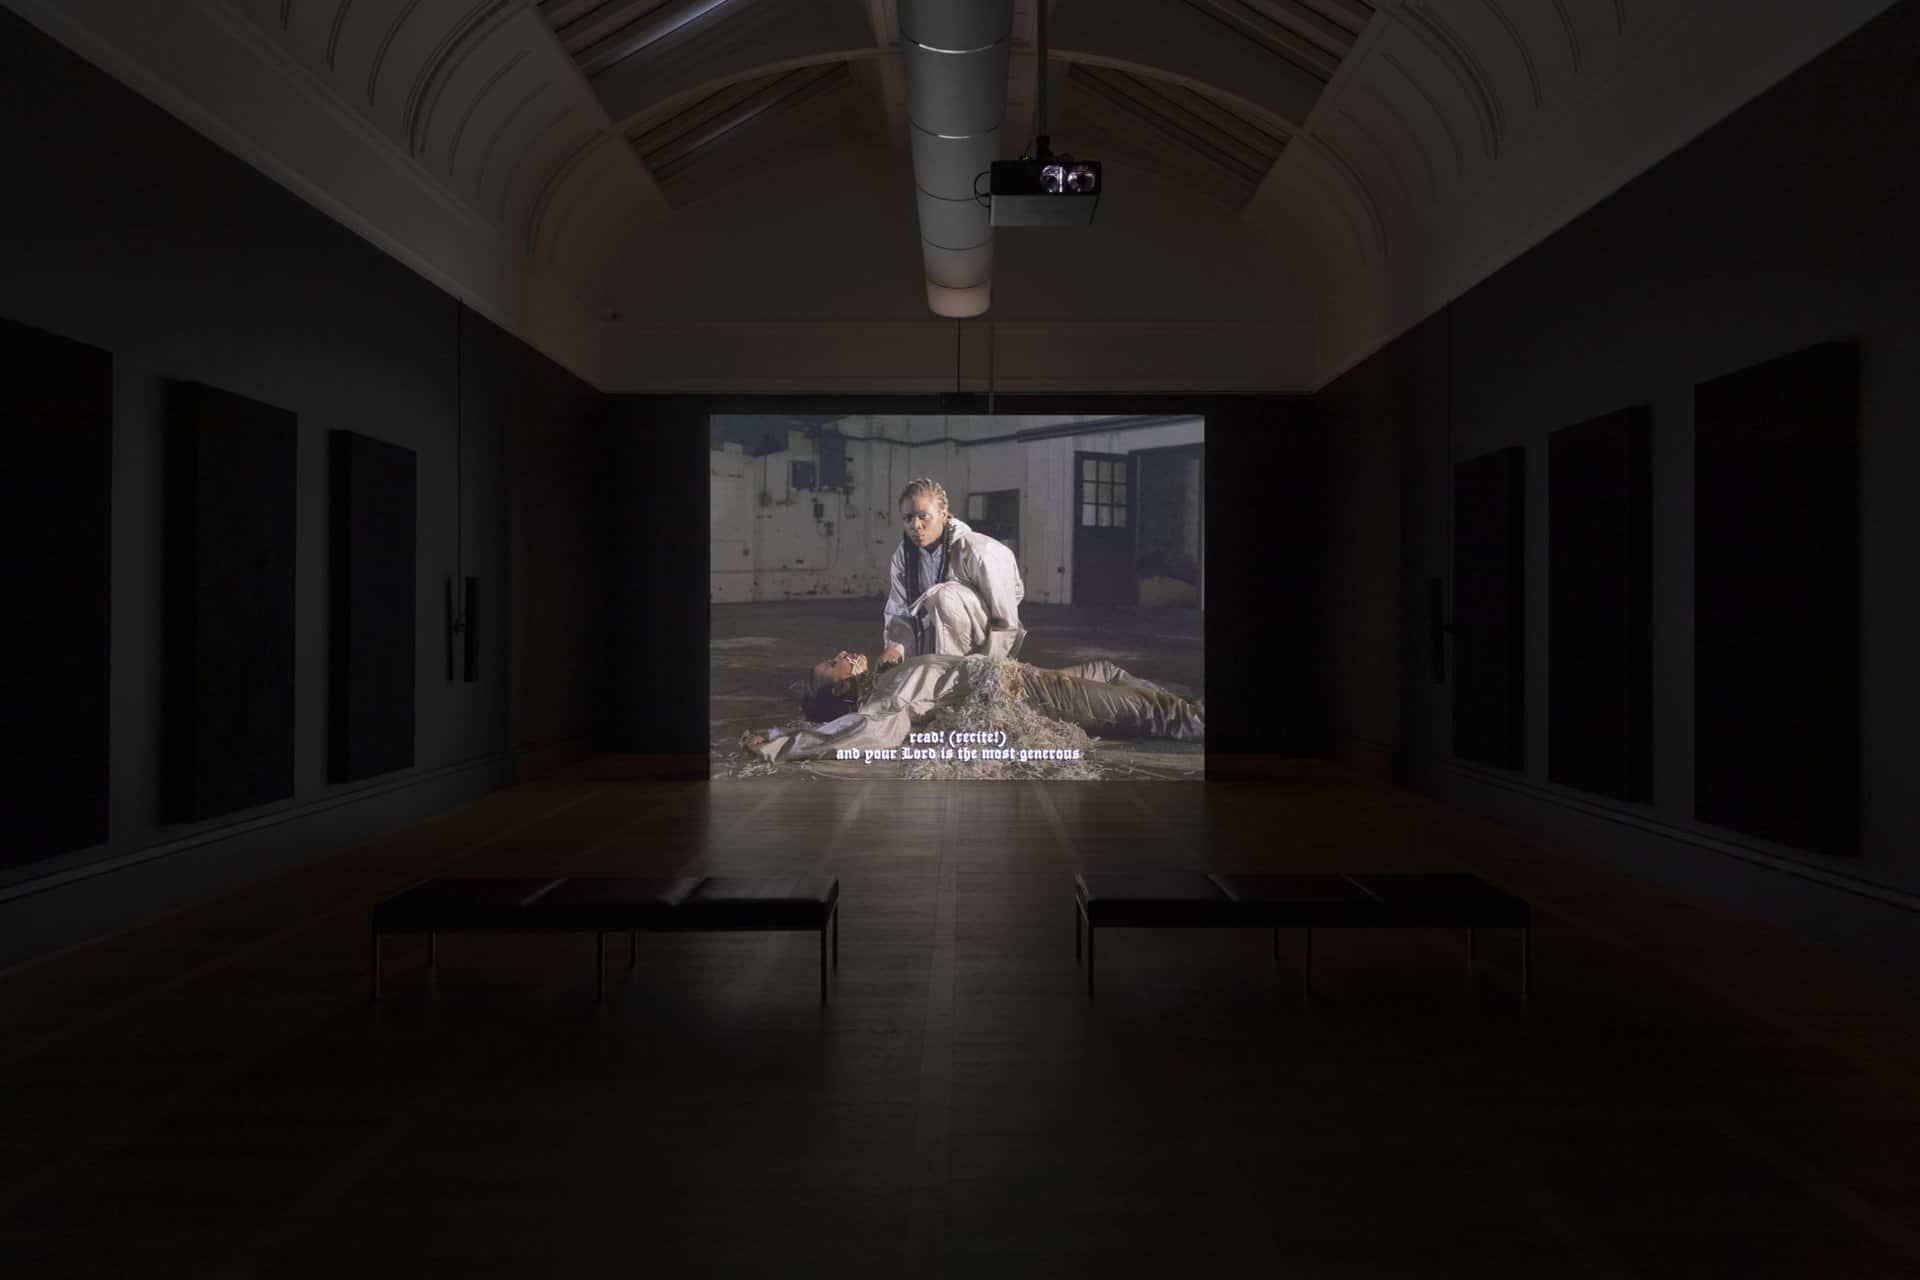 Sophia Al-Maria
Beast Type Song, 2019
Installation view at Tate Britain, London
Courtesy of the artist
